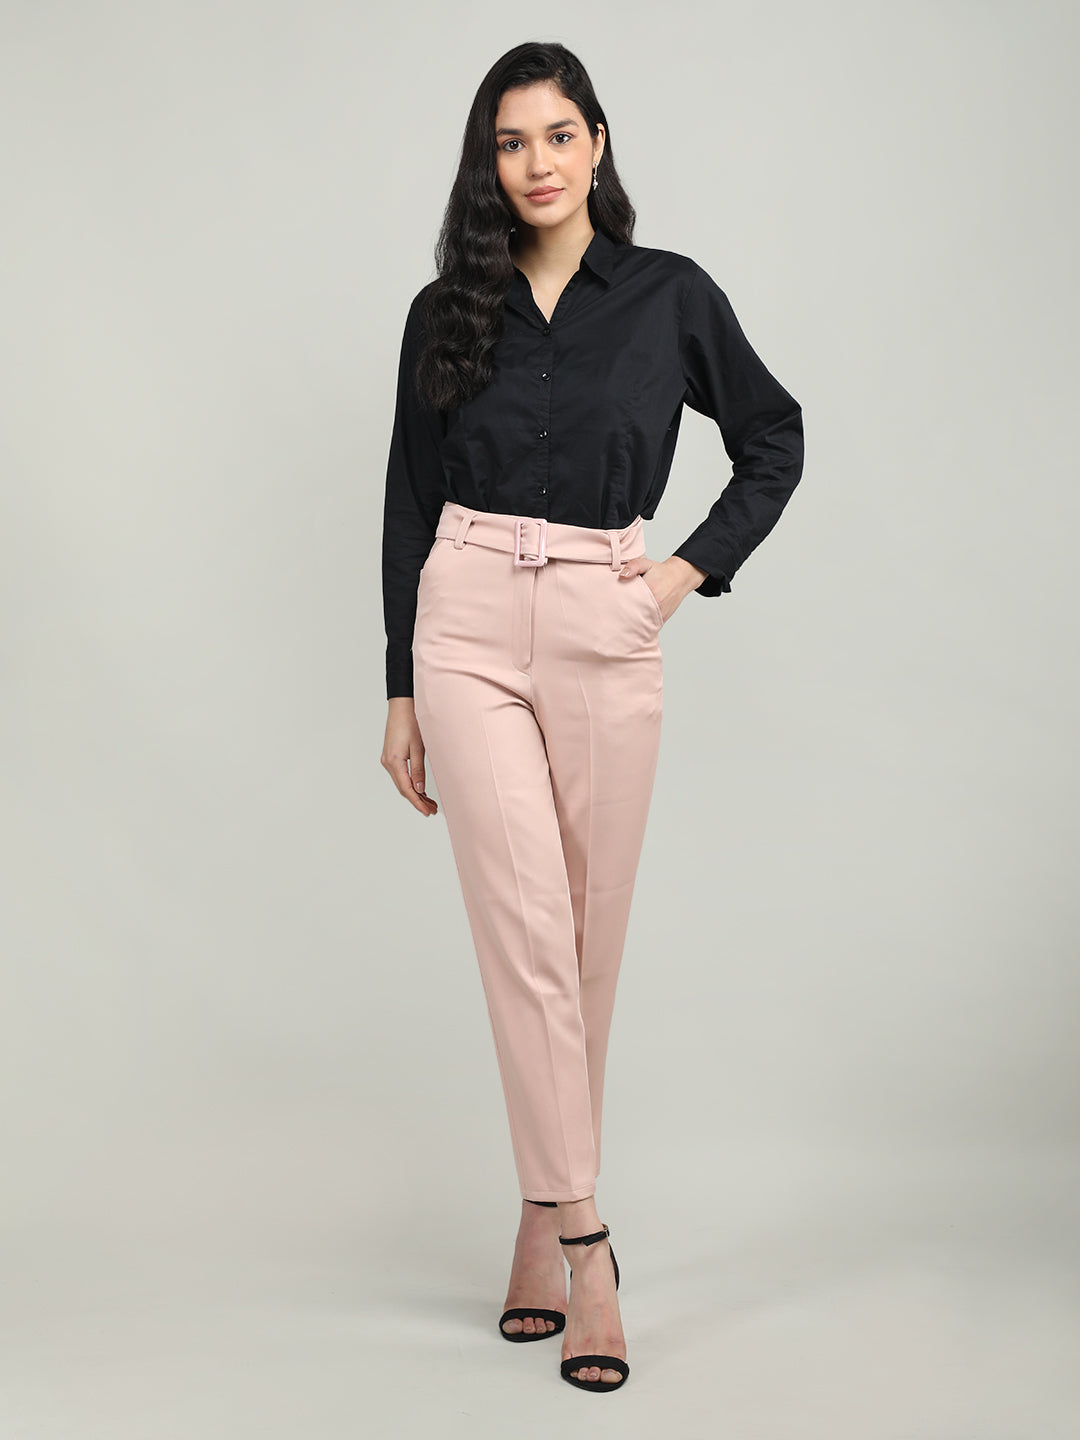 Buy Shararat Matka Cotton Pants with Narrow Bottom/Trousers/Pants/Chinos/Formal  Trousers College/Office for Girls/Women/Ladies Online at Low Prices in  India - Paytmmall.com